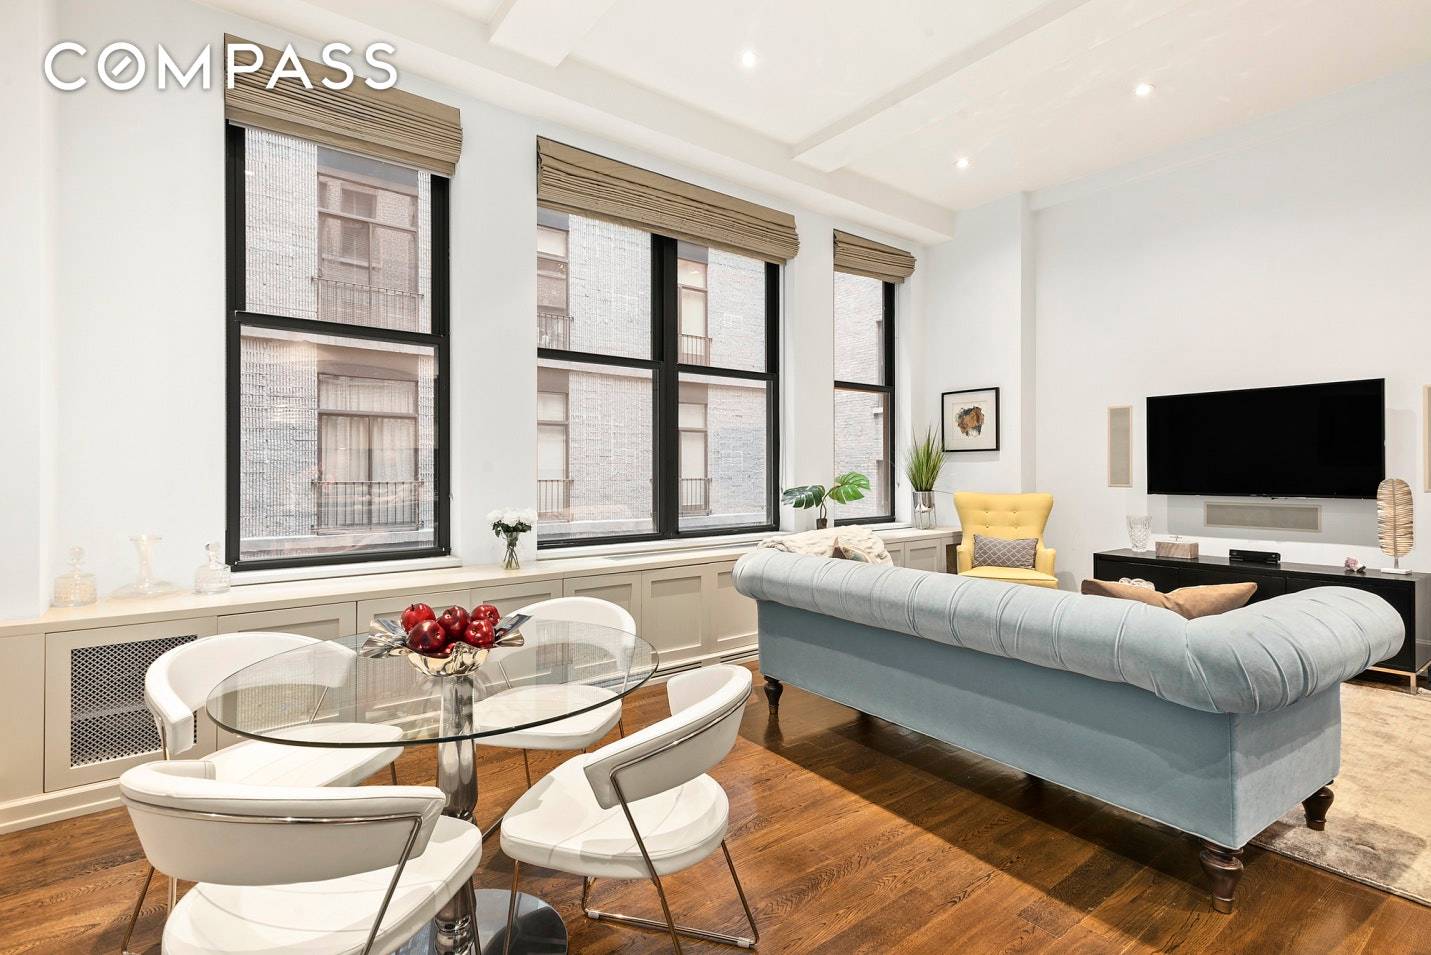 A tremendous, one bedroom, one and a half bath condo with oversized windows and voluminous 11' ceilings that heighten the classic NYC loft feel of this beautiful home.